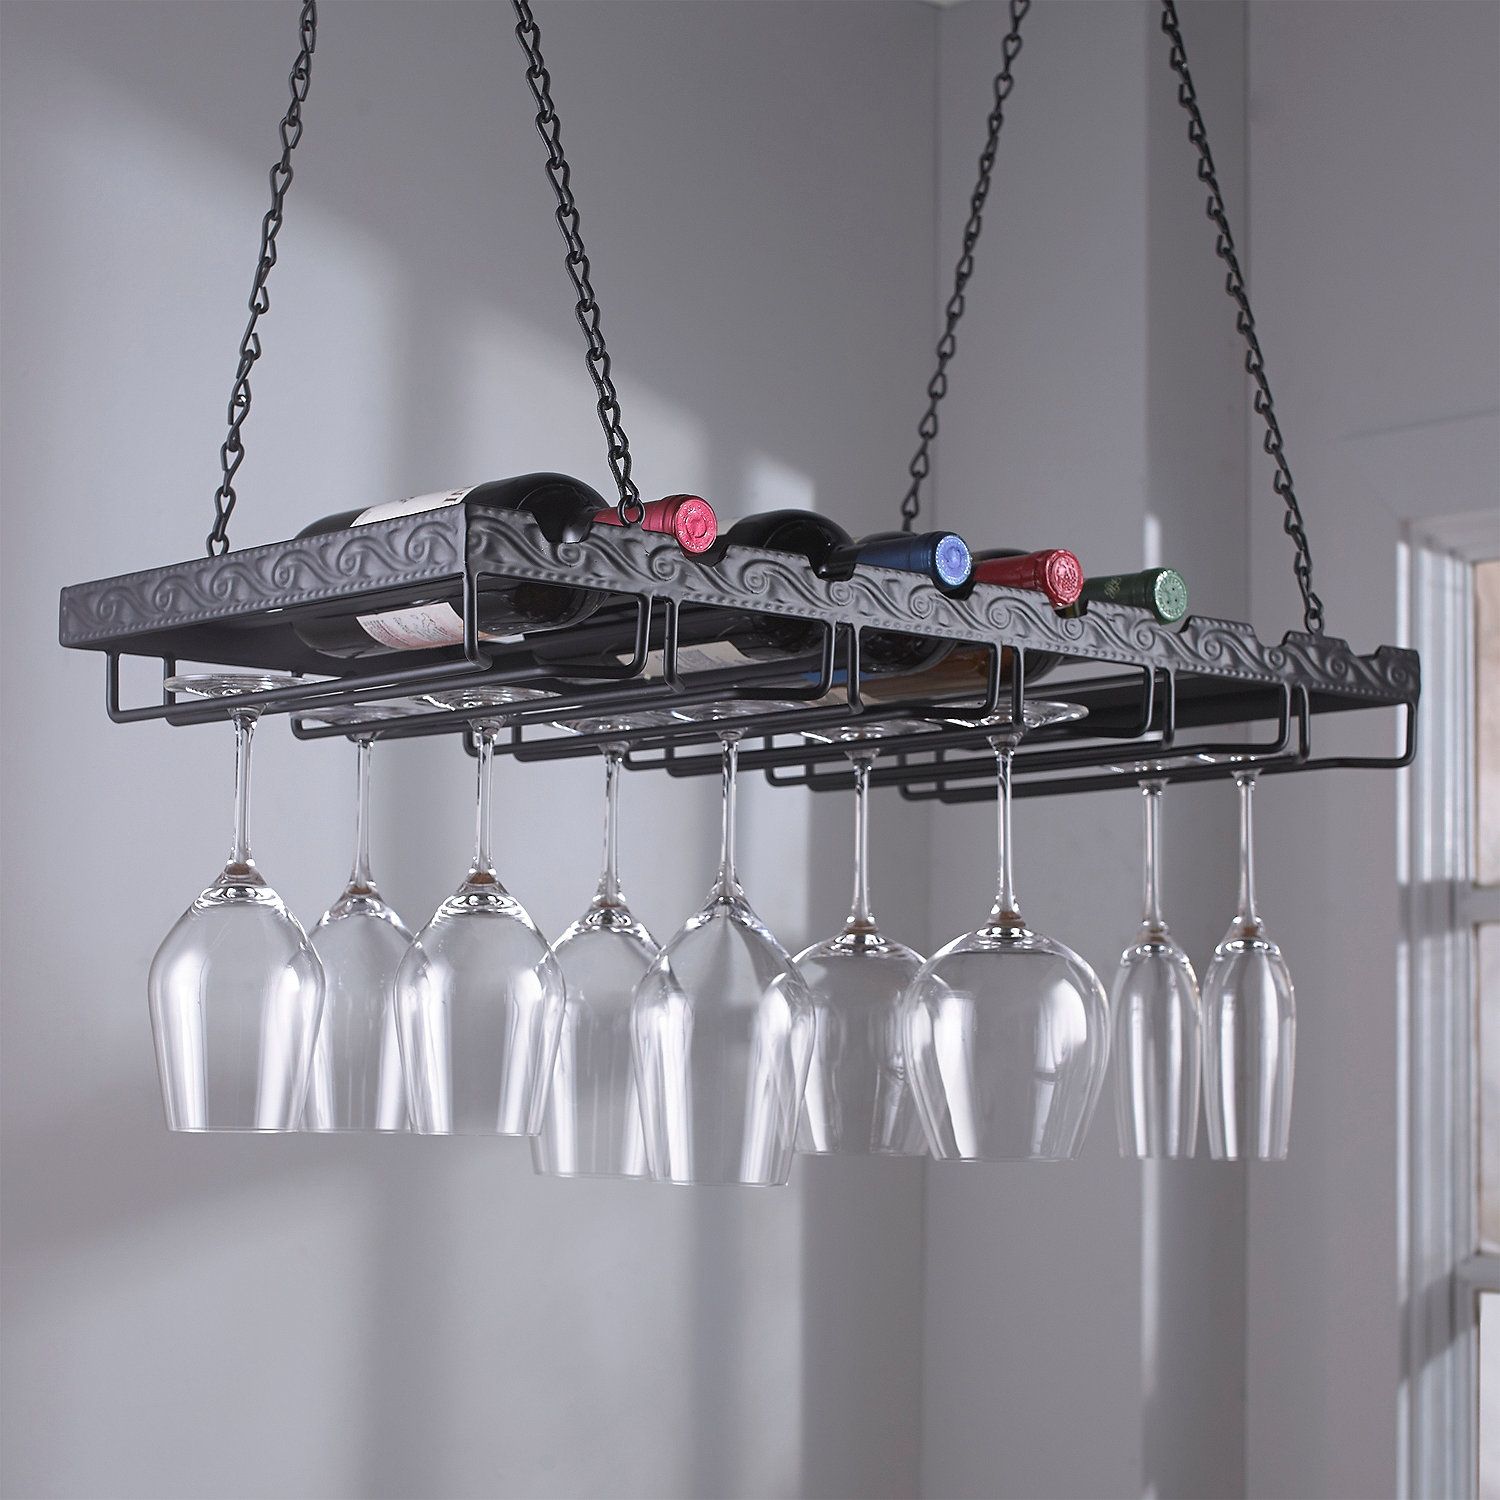 Metal Hanging Wine Glass Rack Hanging Wine Glass Rack Wine With Regard To Glass Suspension Shelves (View 15 of 15)